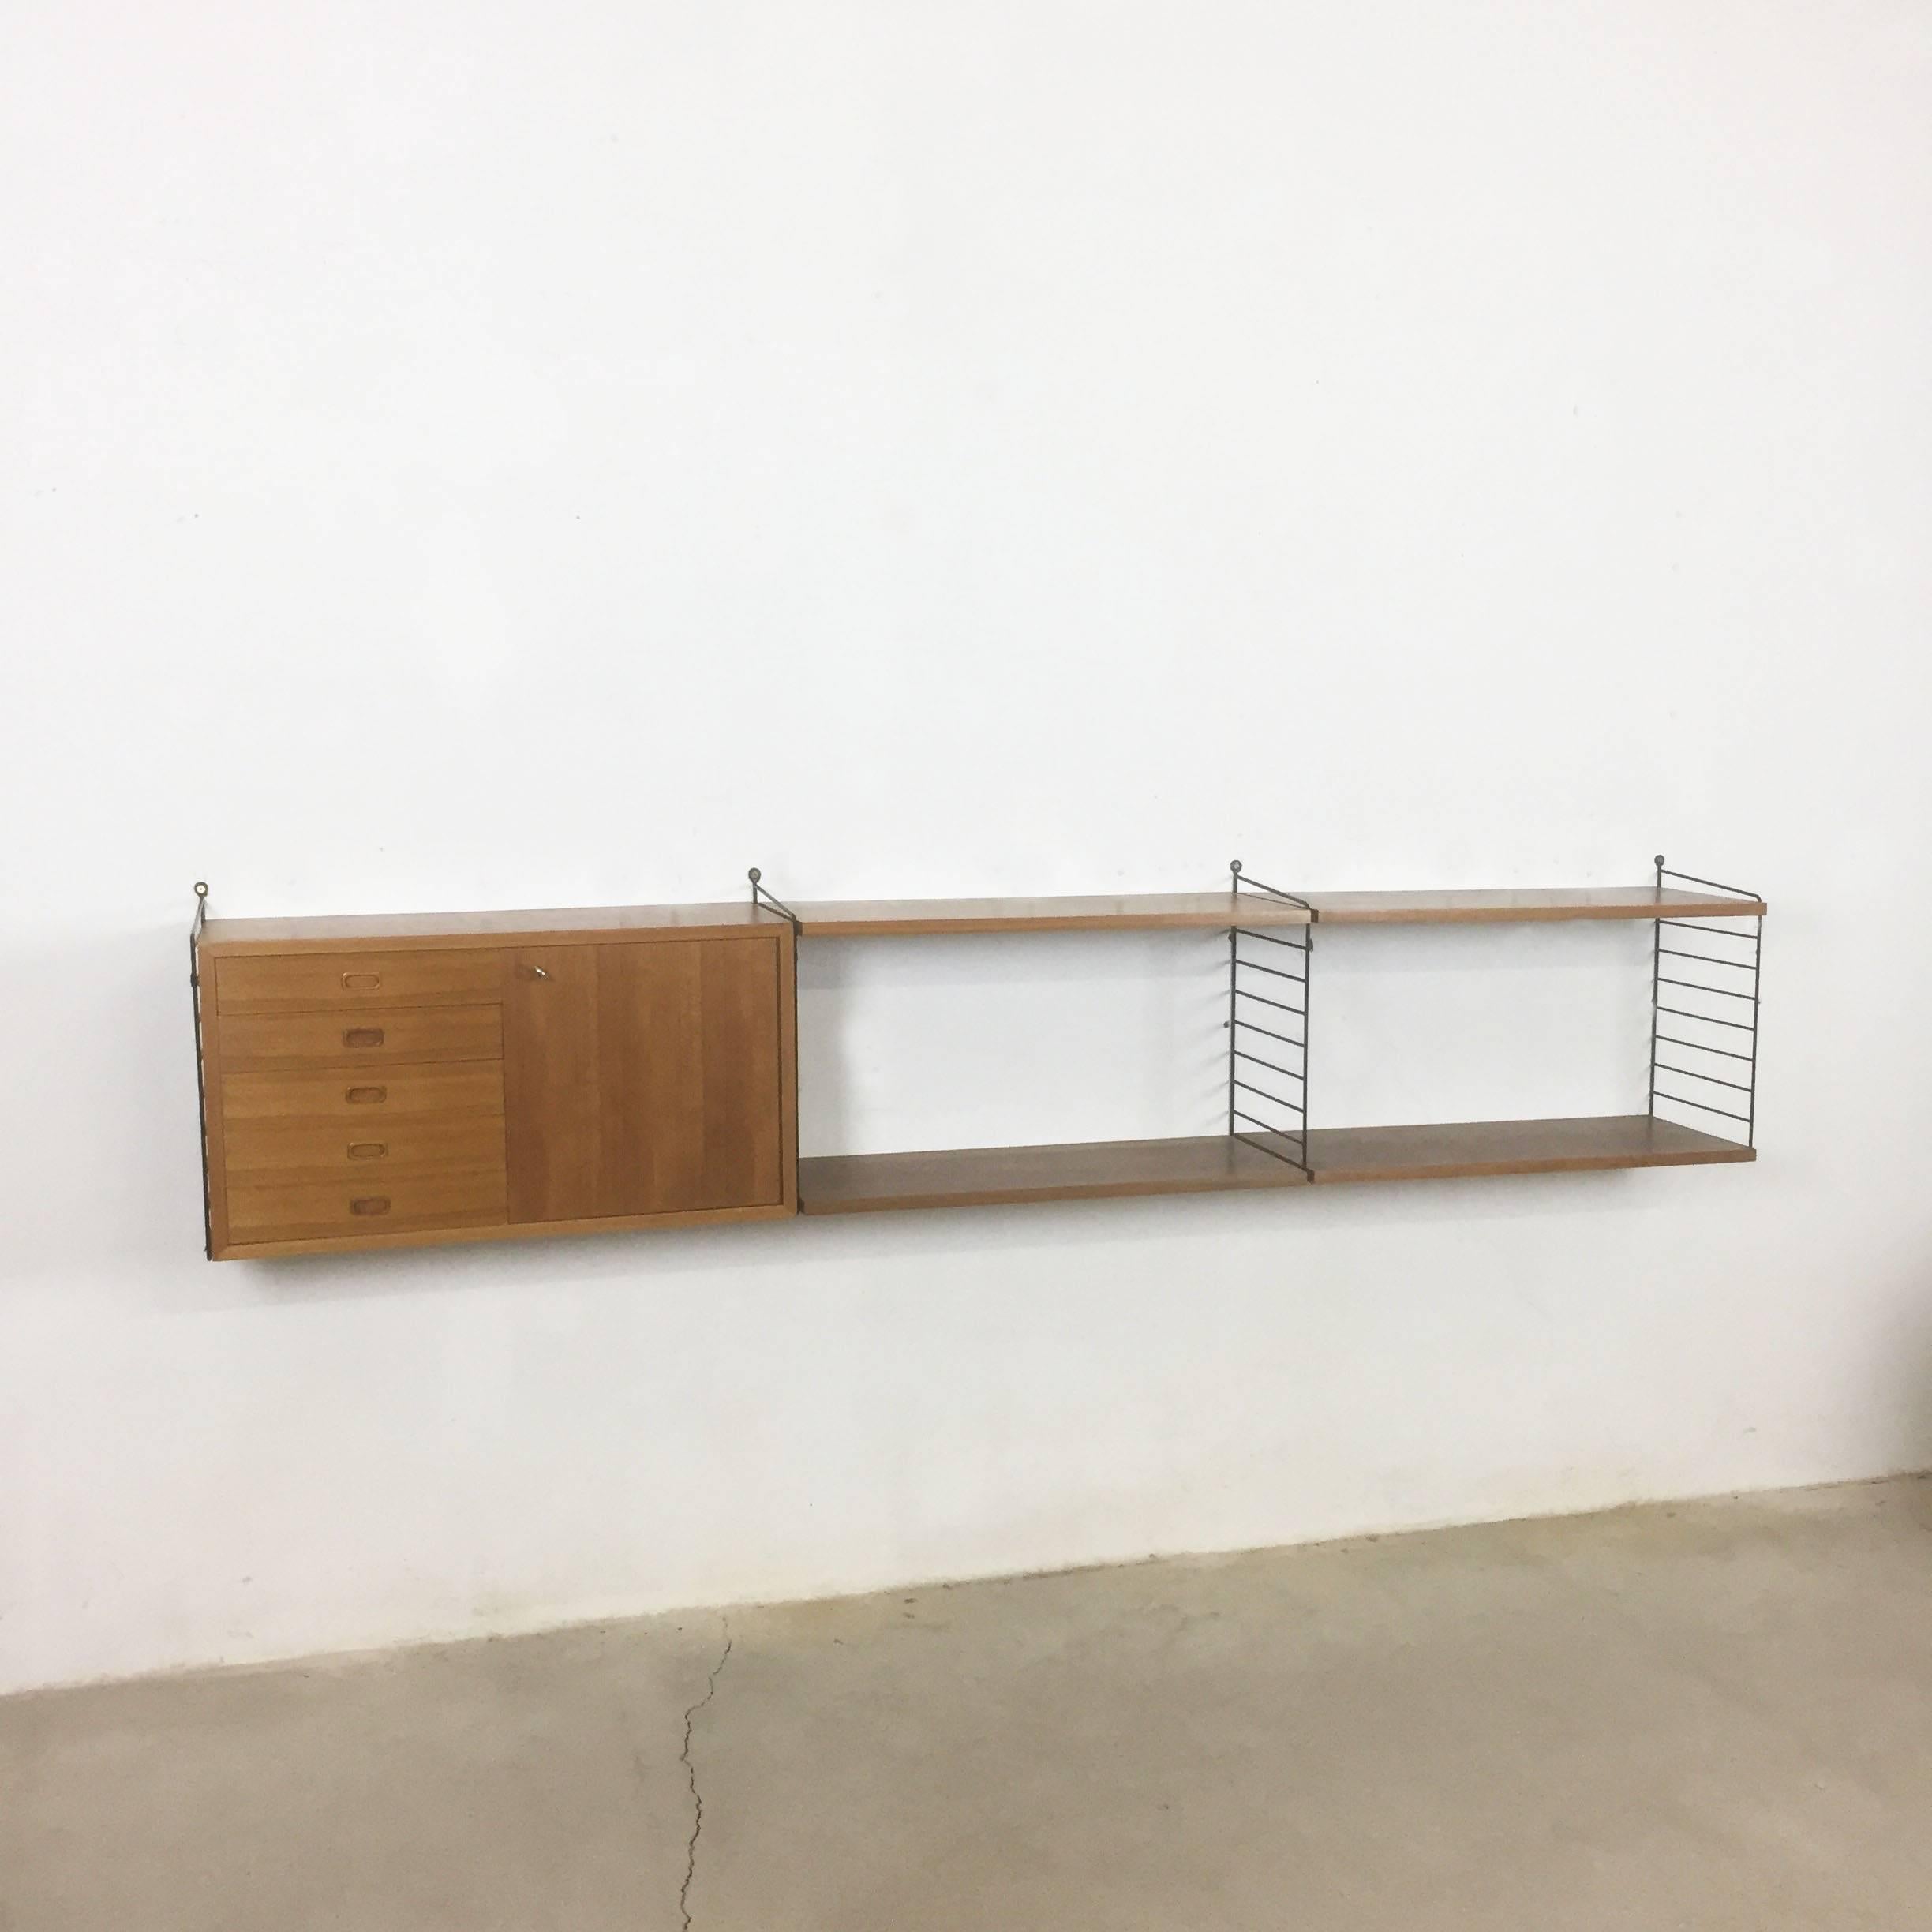 String regal wall unit

Made in Sweden

Bokhyllan 'The Ladder Shelf’

Design: Nils und Kajsa Strinning, 1949

The architect Nisse Strinning was born in 1917. From 1940-1947 he studied architecture in Stockholm, before he designed the